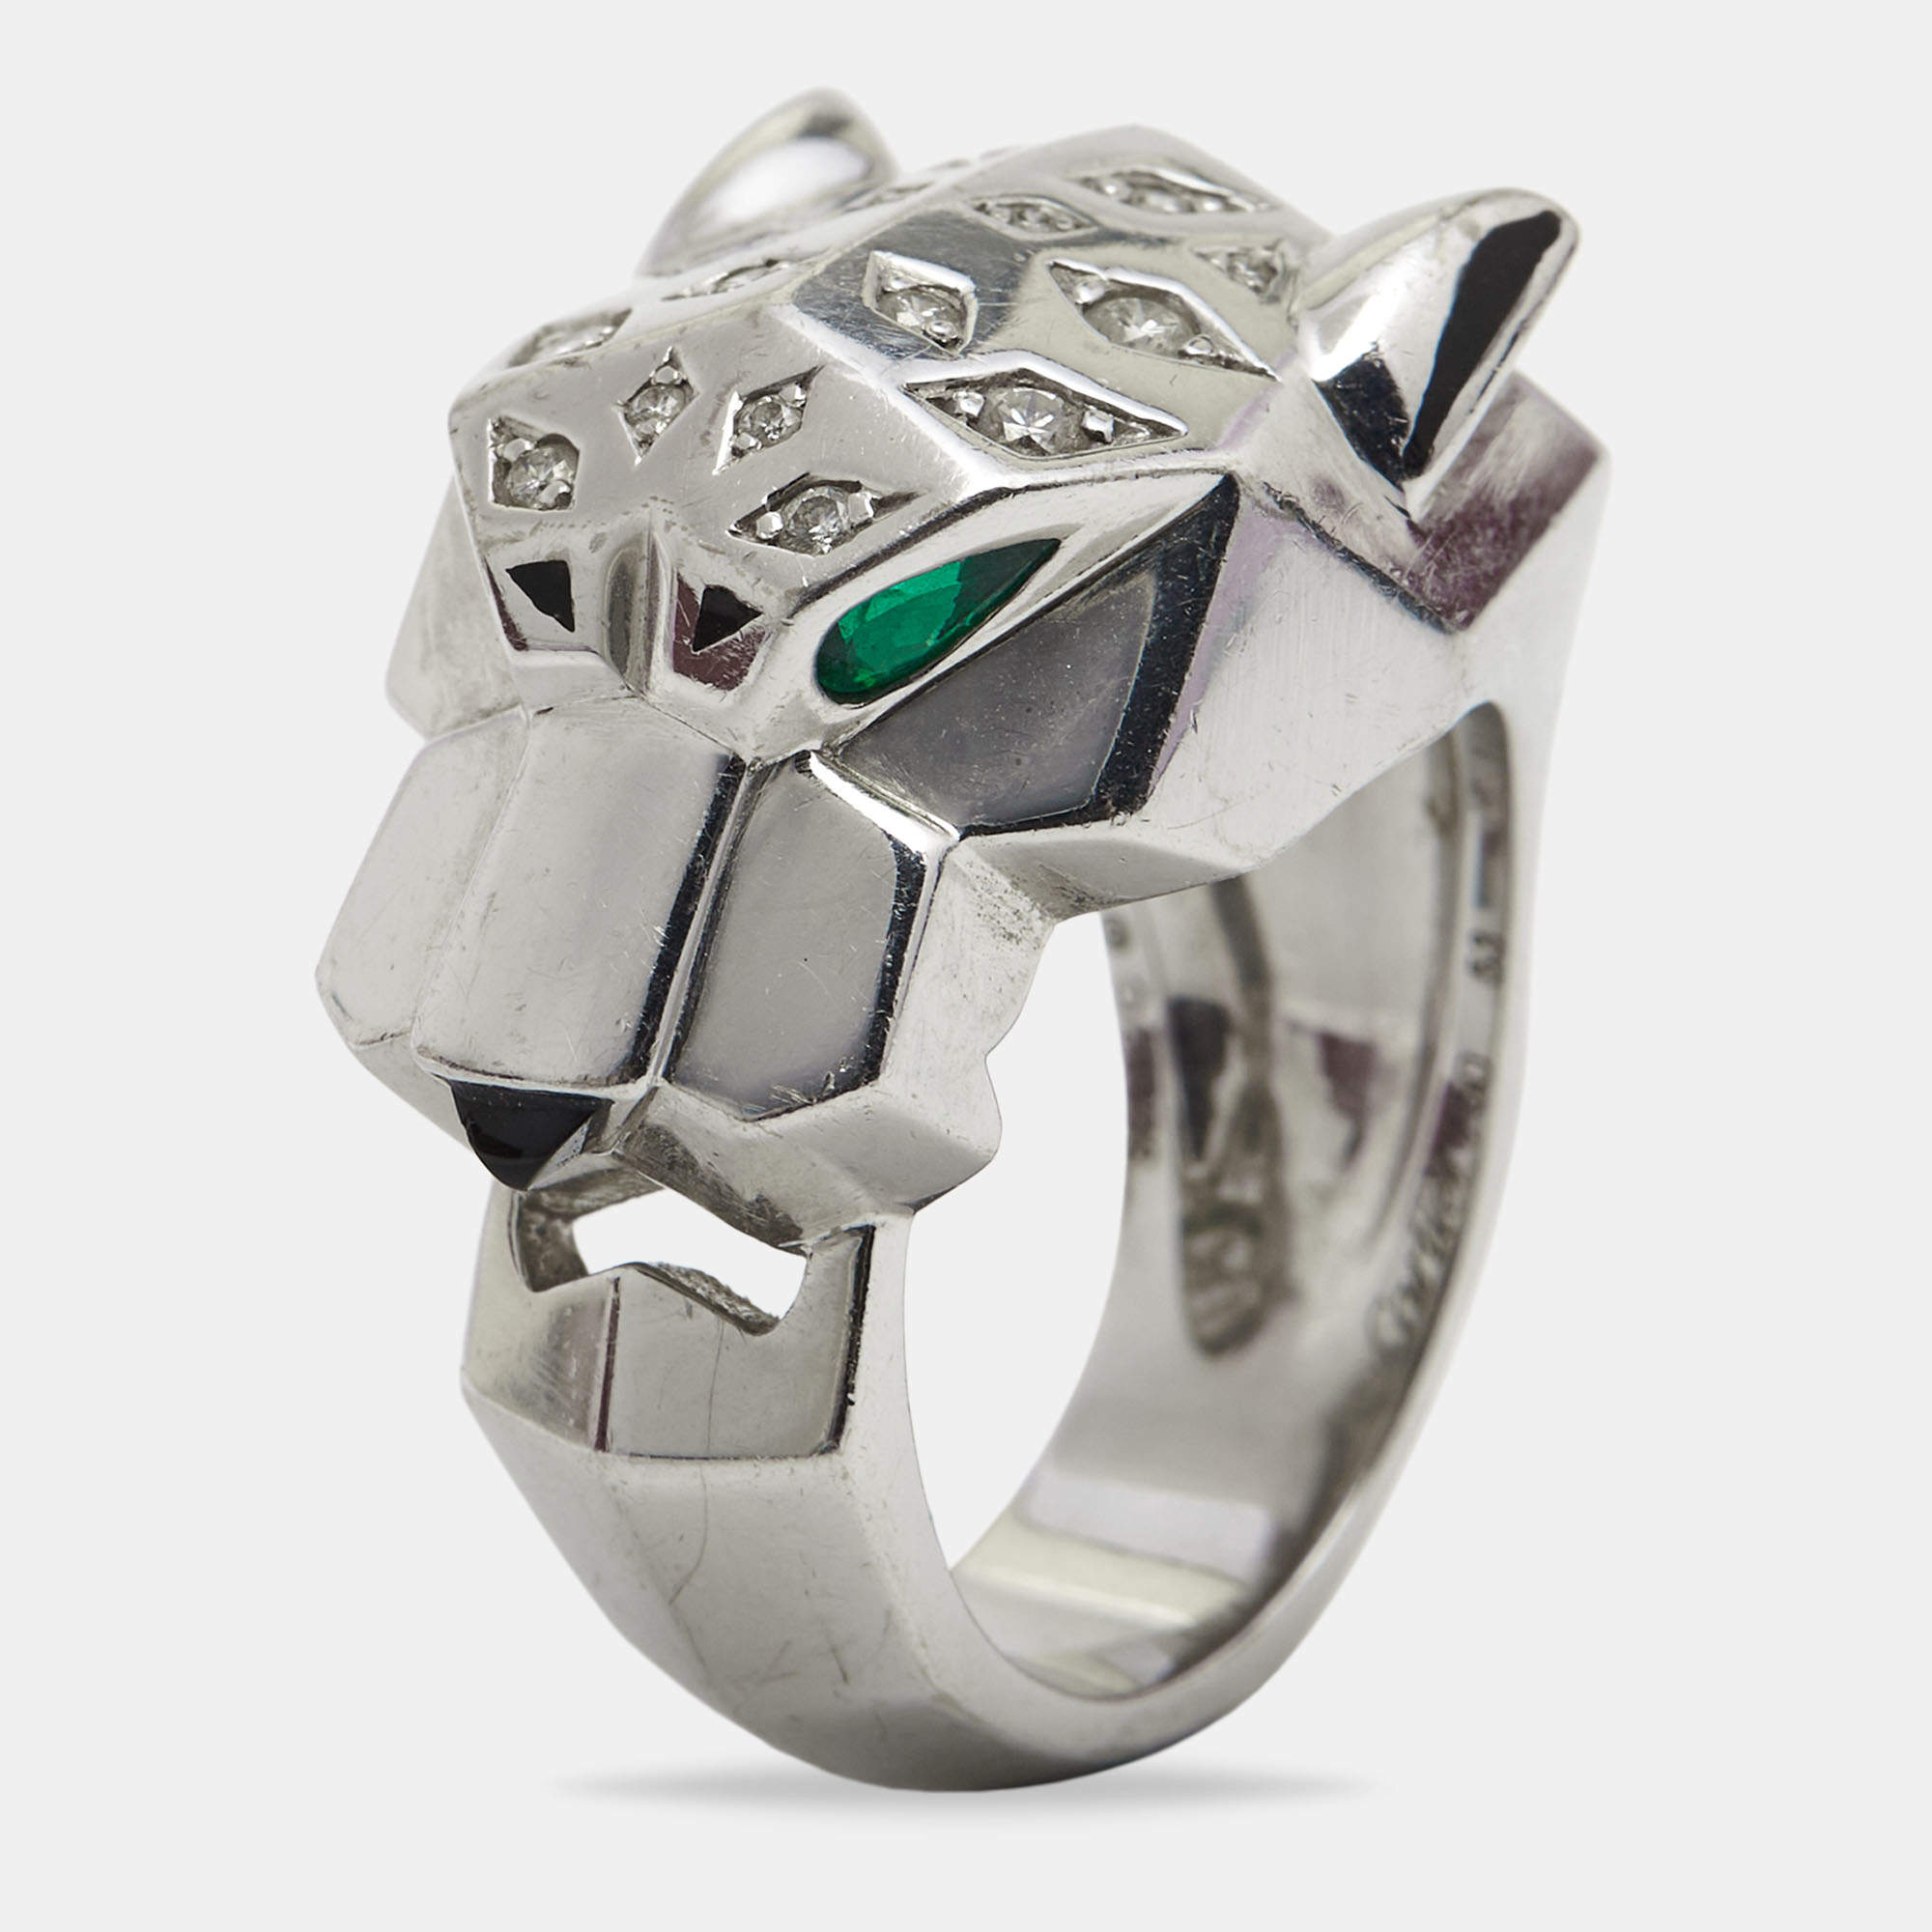 Cartier Panthere de Cartier Multi Gemstone Lacquer 18k White Gold Ring Size 53